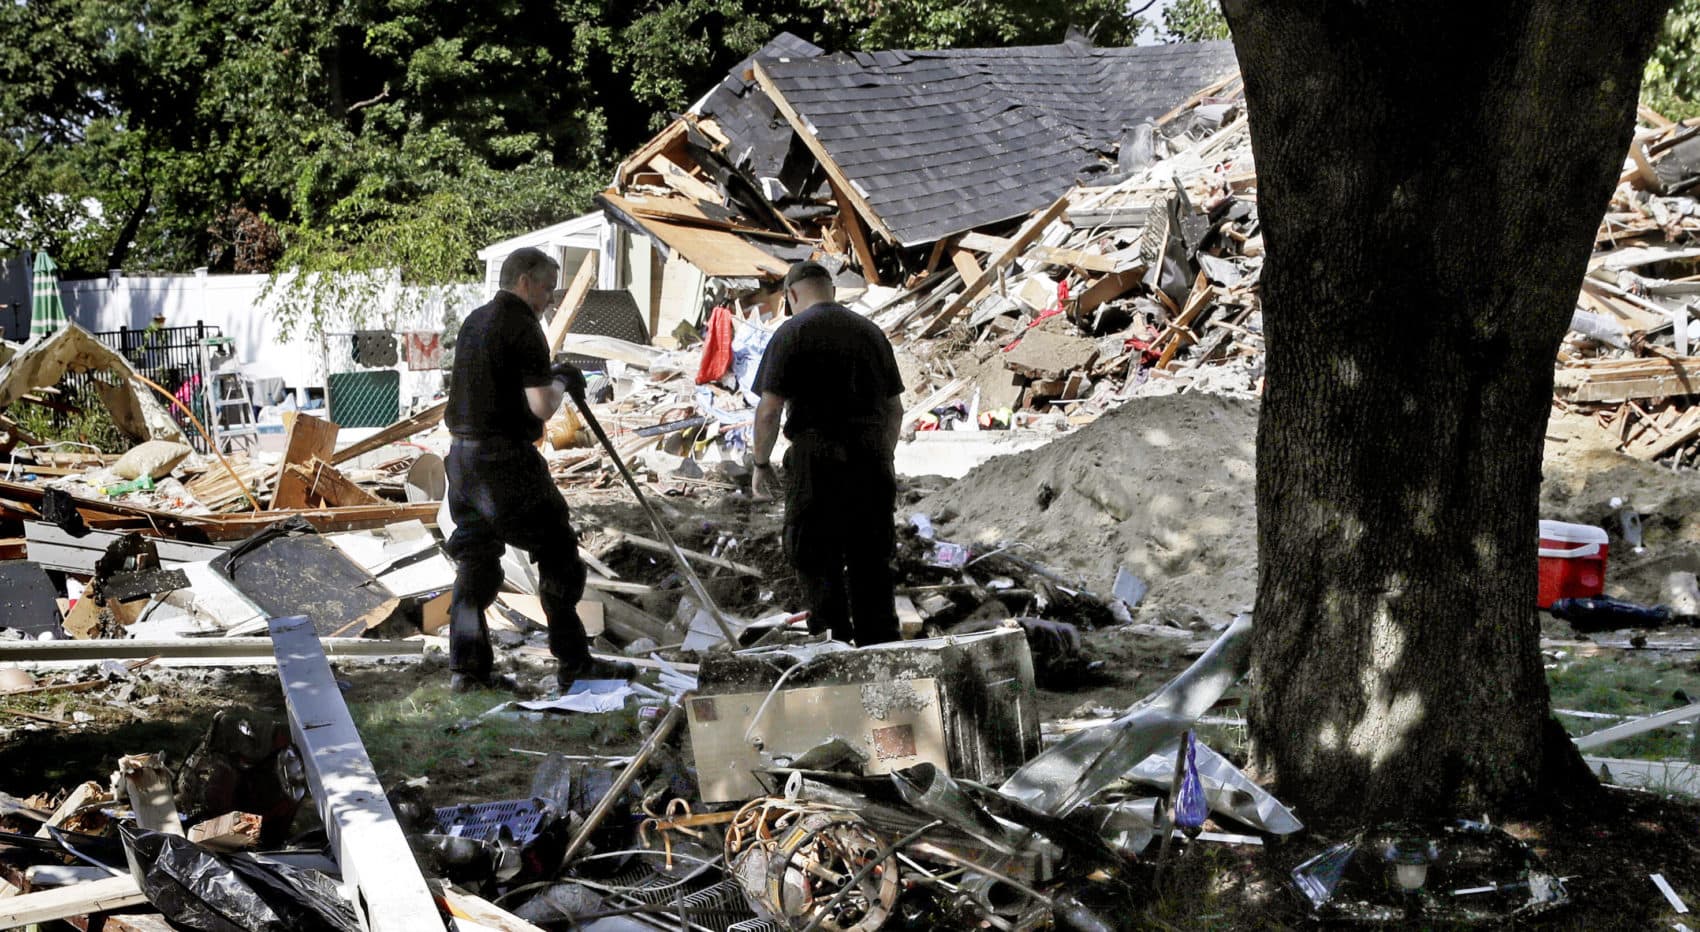 Fire investigators outside a home that exploded after the gas line failure on Sept. 13 in Lawrence. (Charles Krupa/AP)